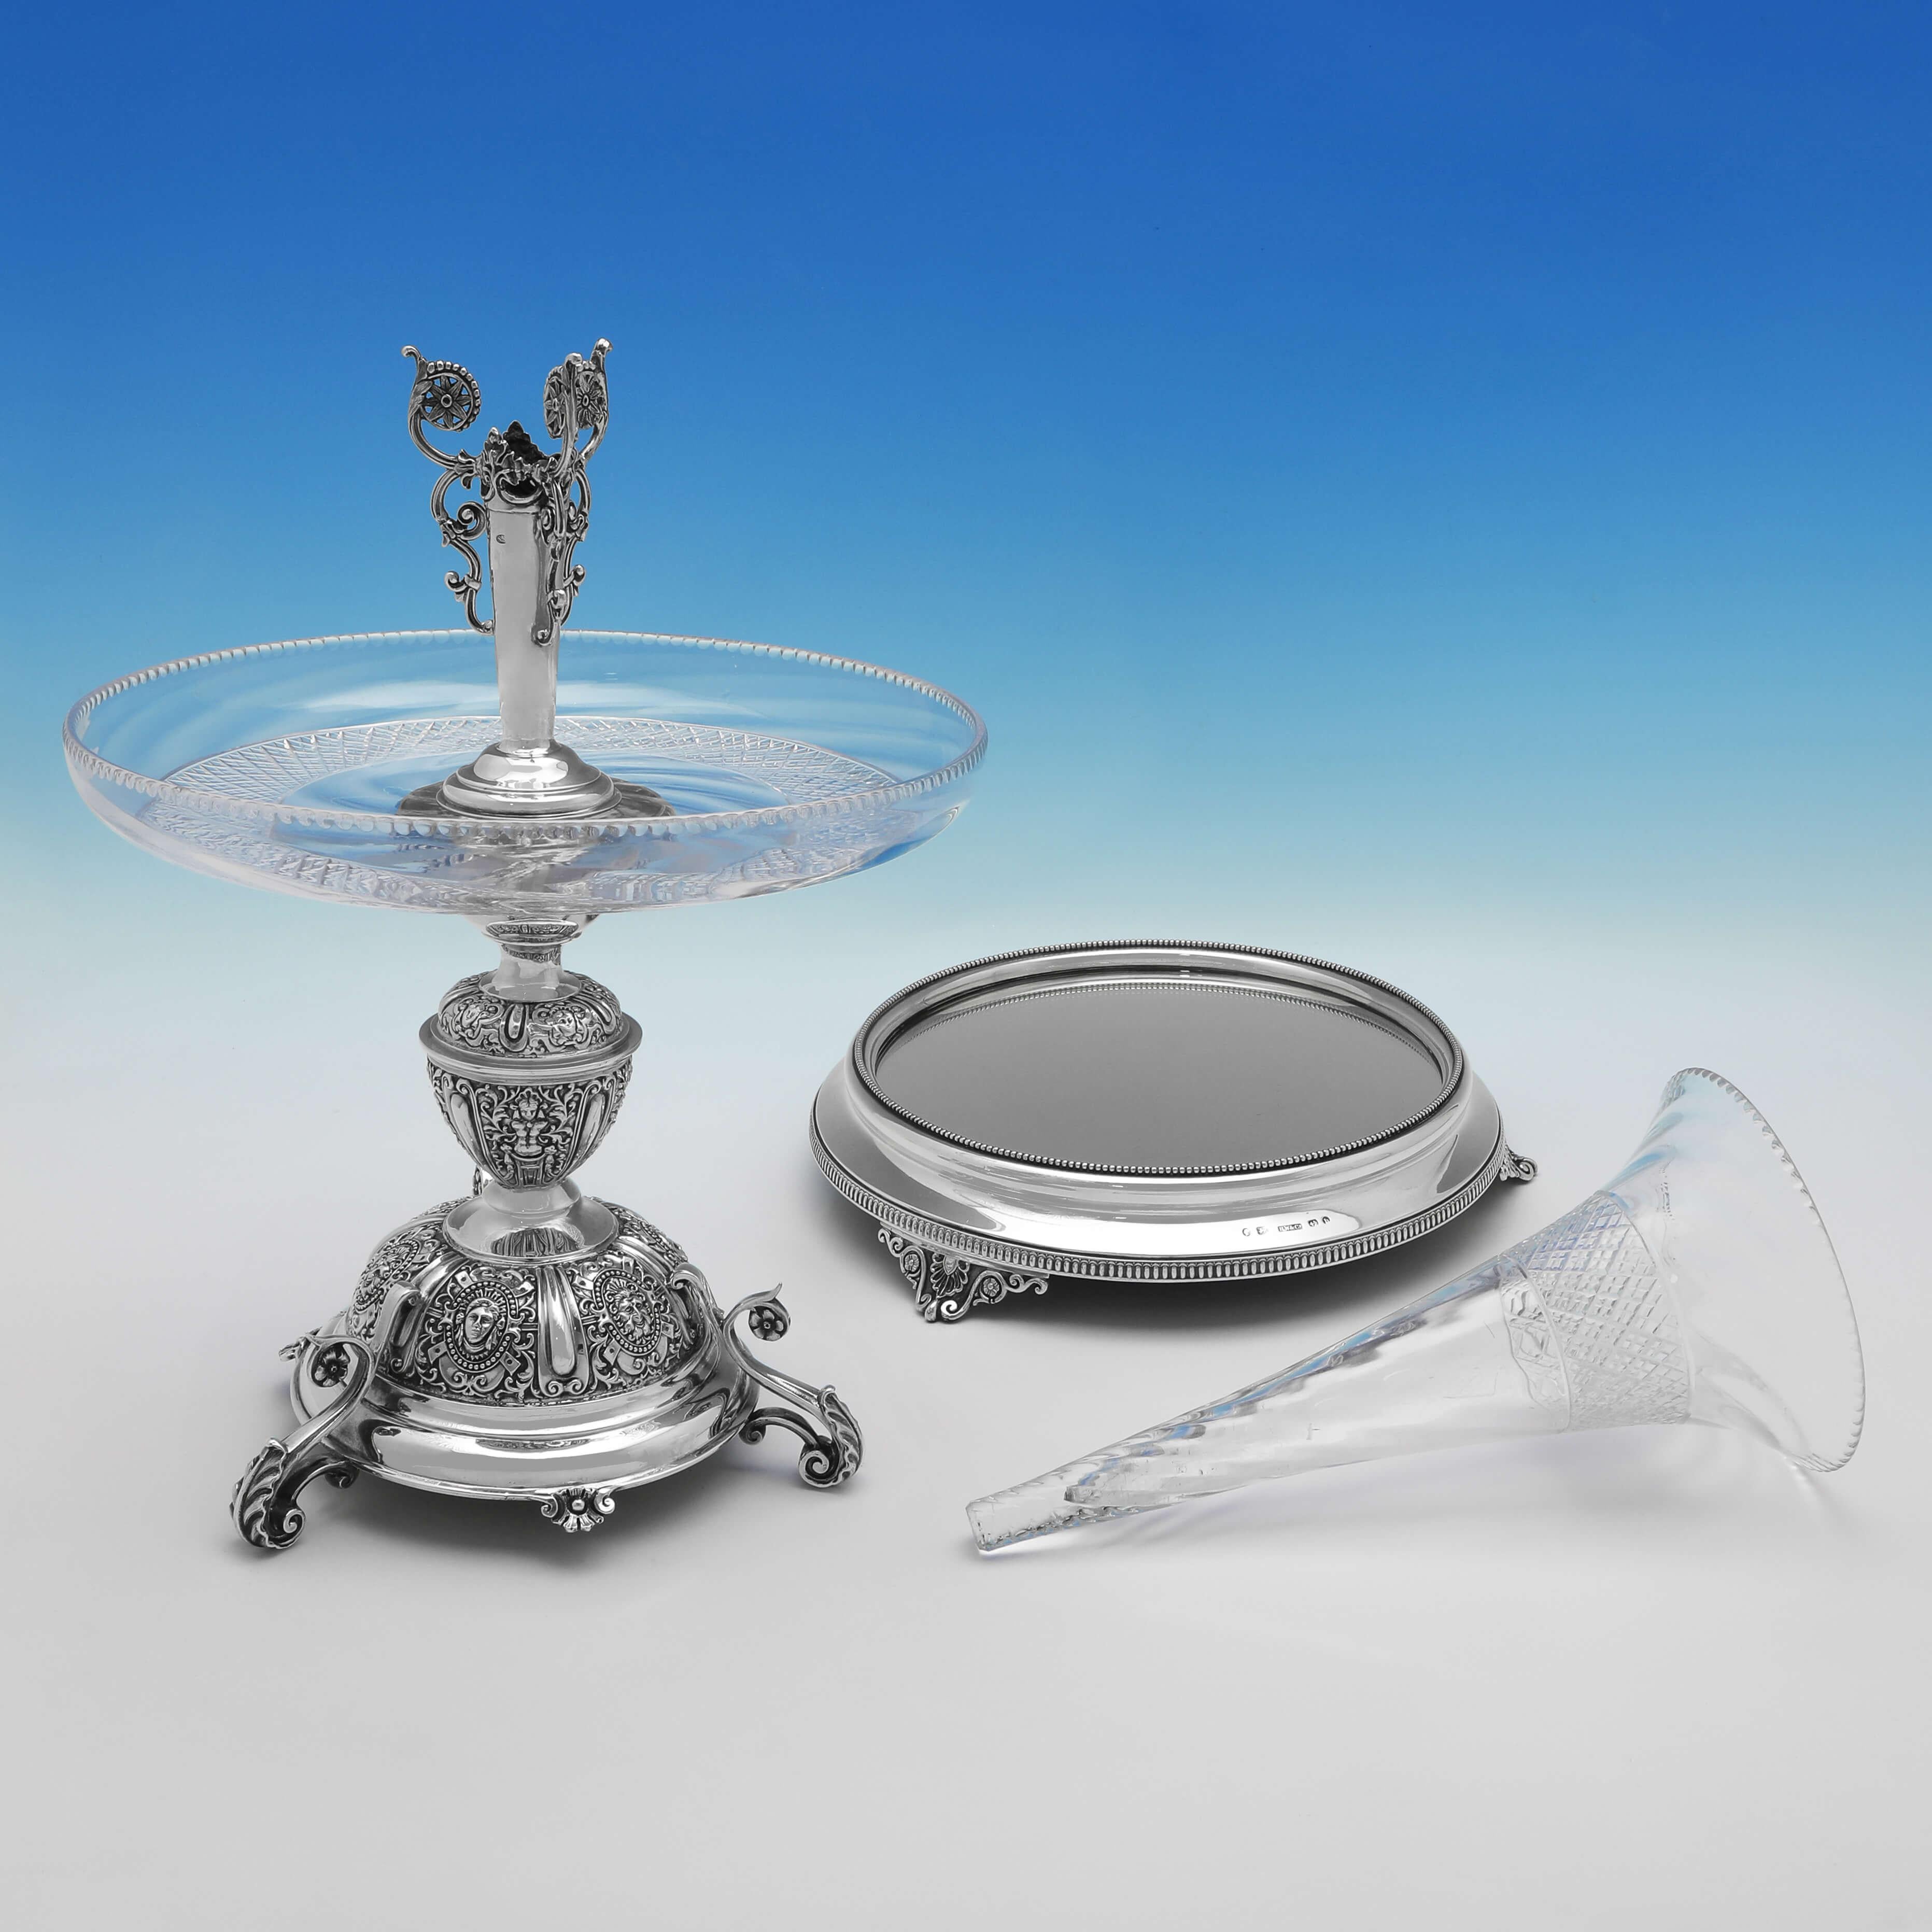 Hallmarked in London in 1876 by Samuel Smily with the matching plateau hallmarked in Birmingham in 1876 by Horace Woodward & Co., this stunning, Victorian, Antique Sterling Silver Centrepiece, holds a glass vase and a glass dish, and features